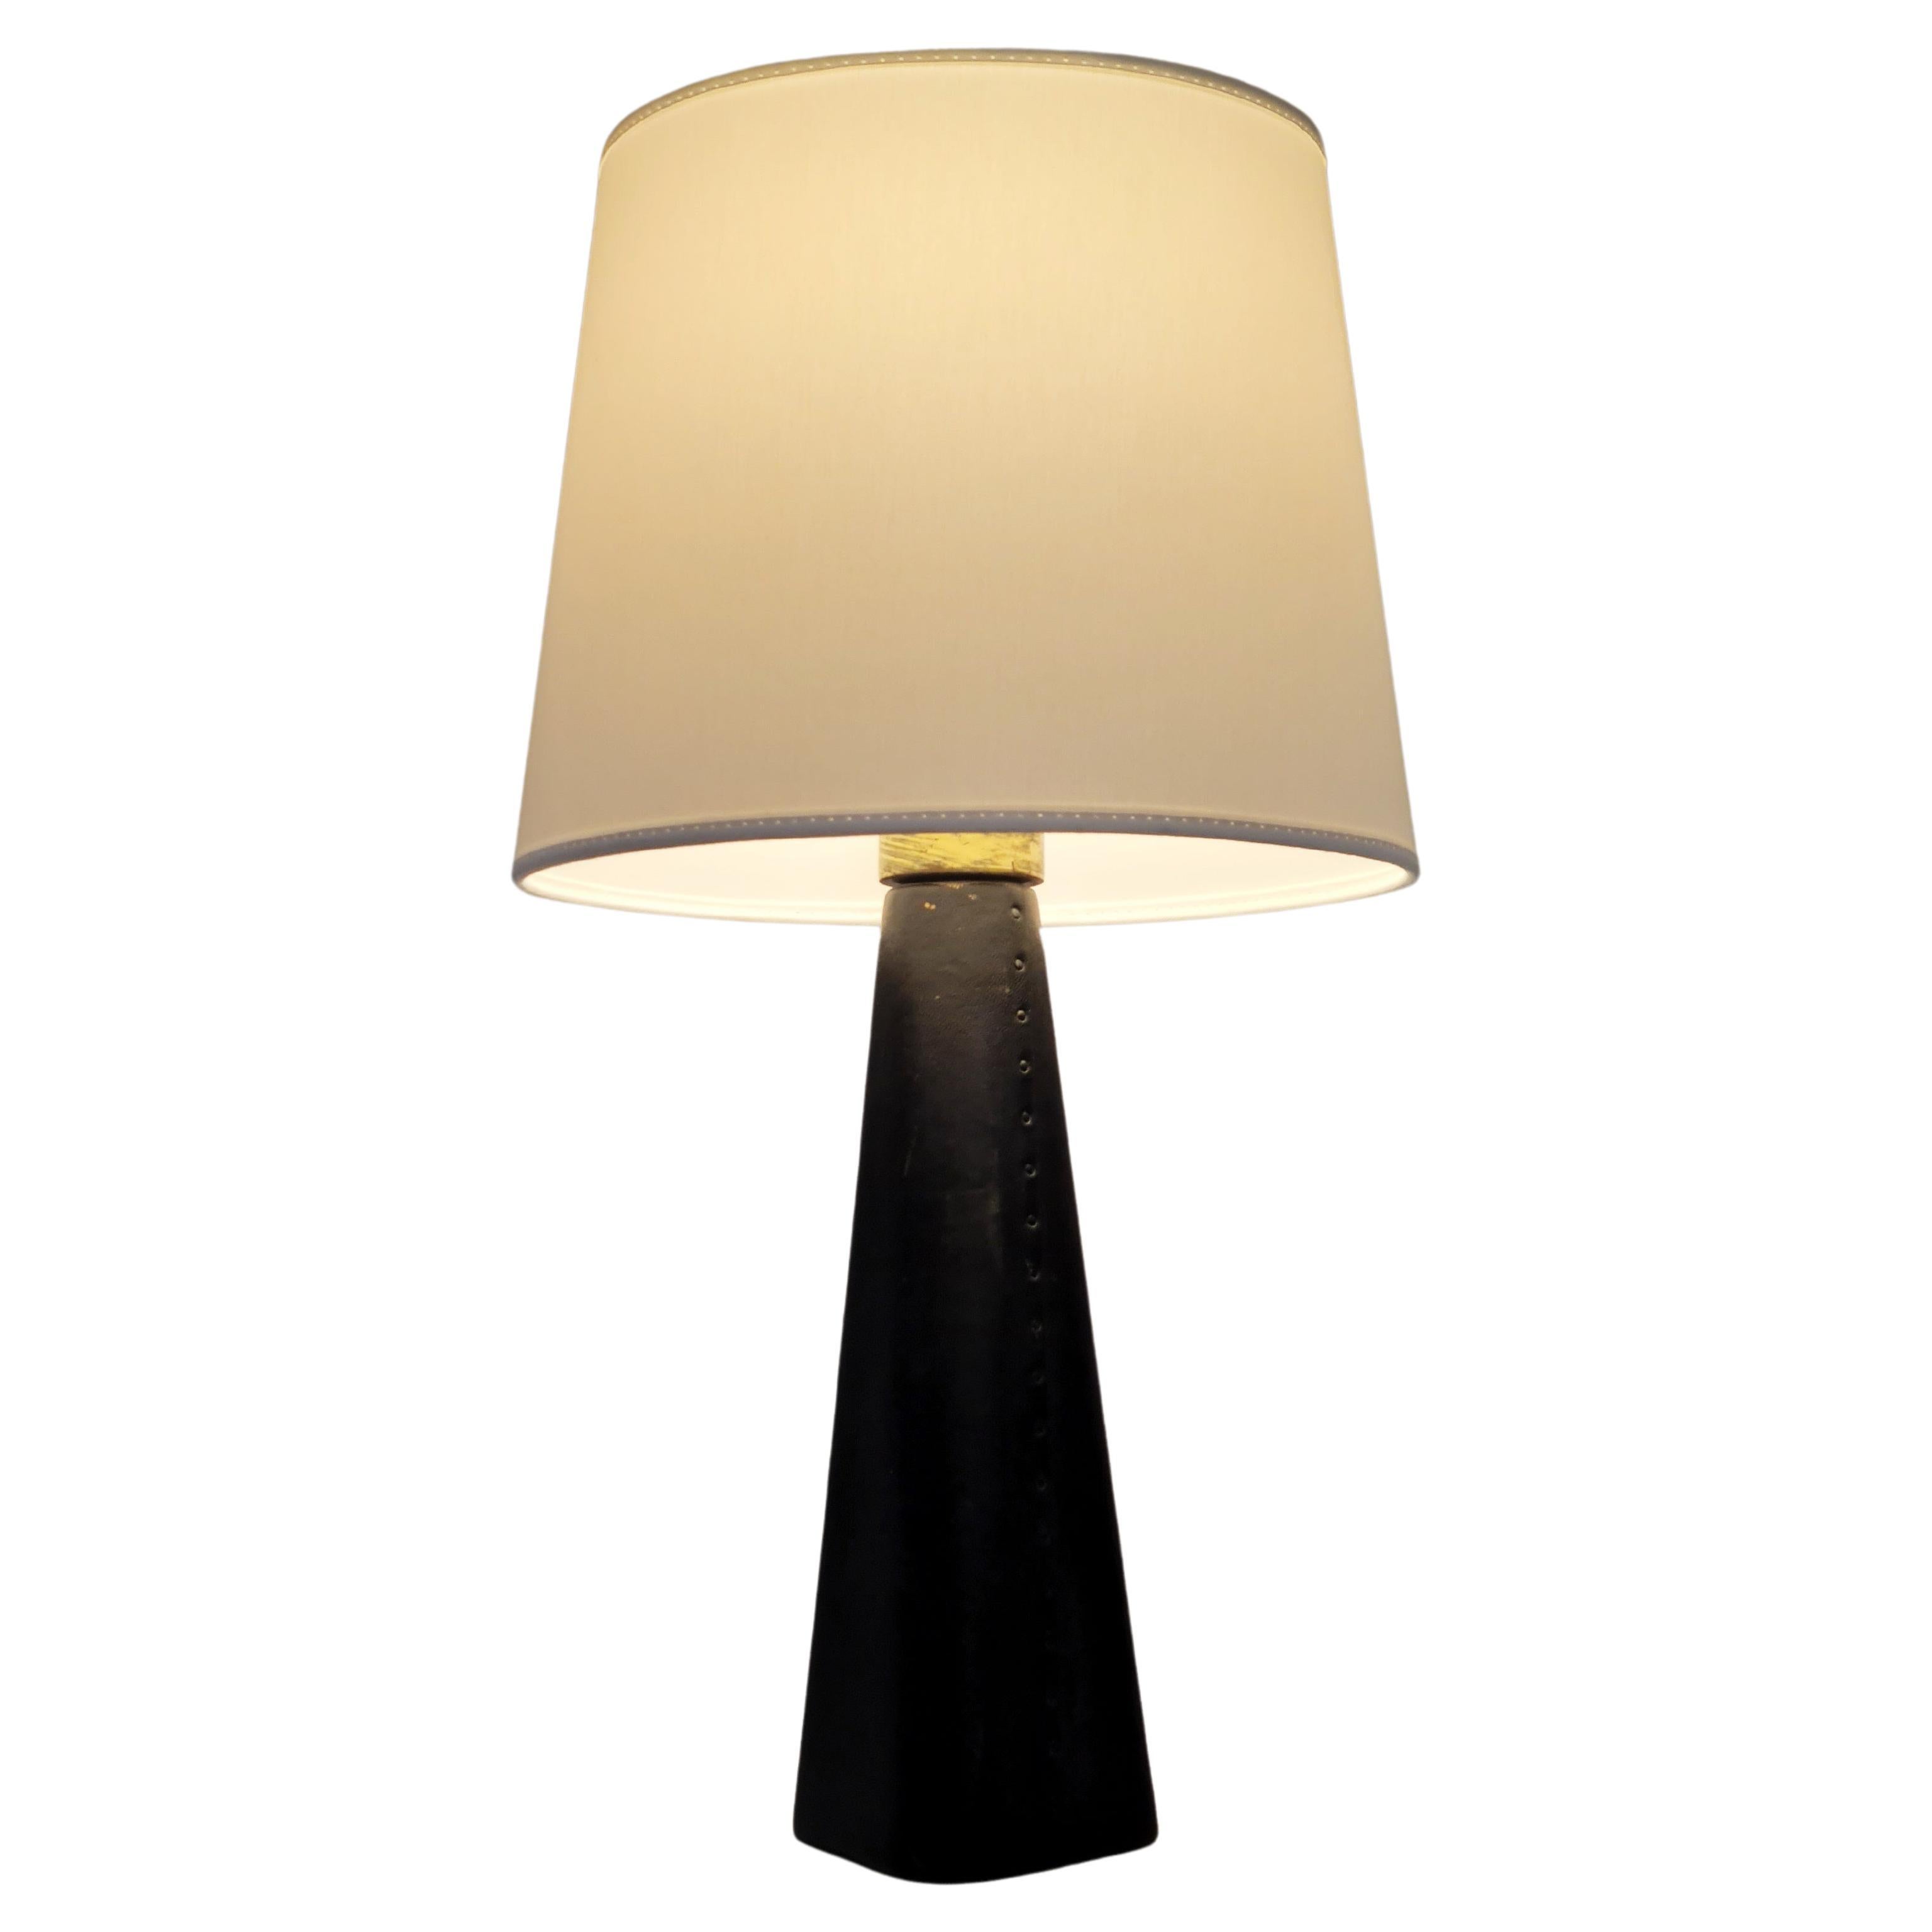 Lisa Johansson-Papé Table Lamp 46-186 LJP in Leather and Silk, Orno For Sale